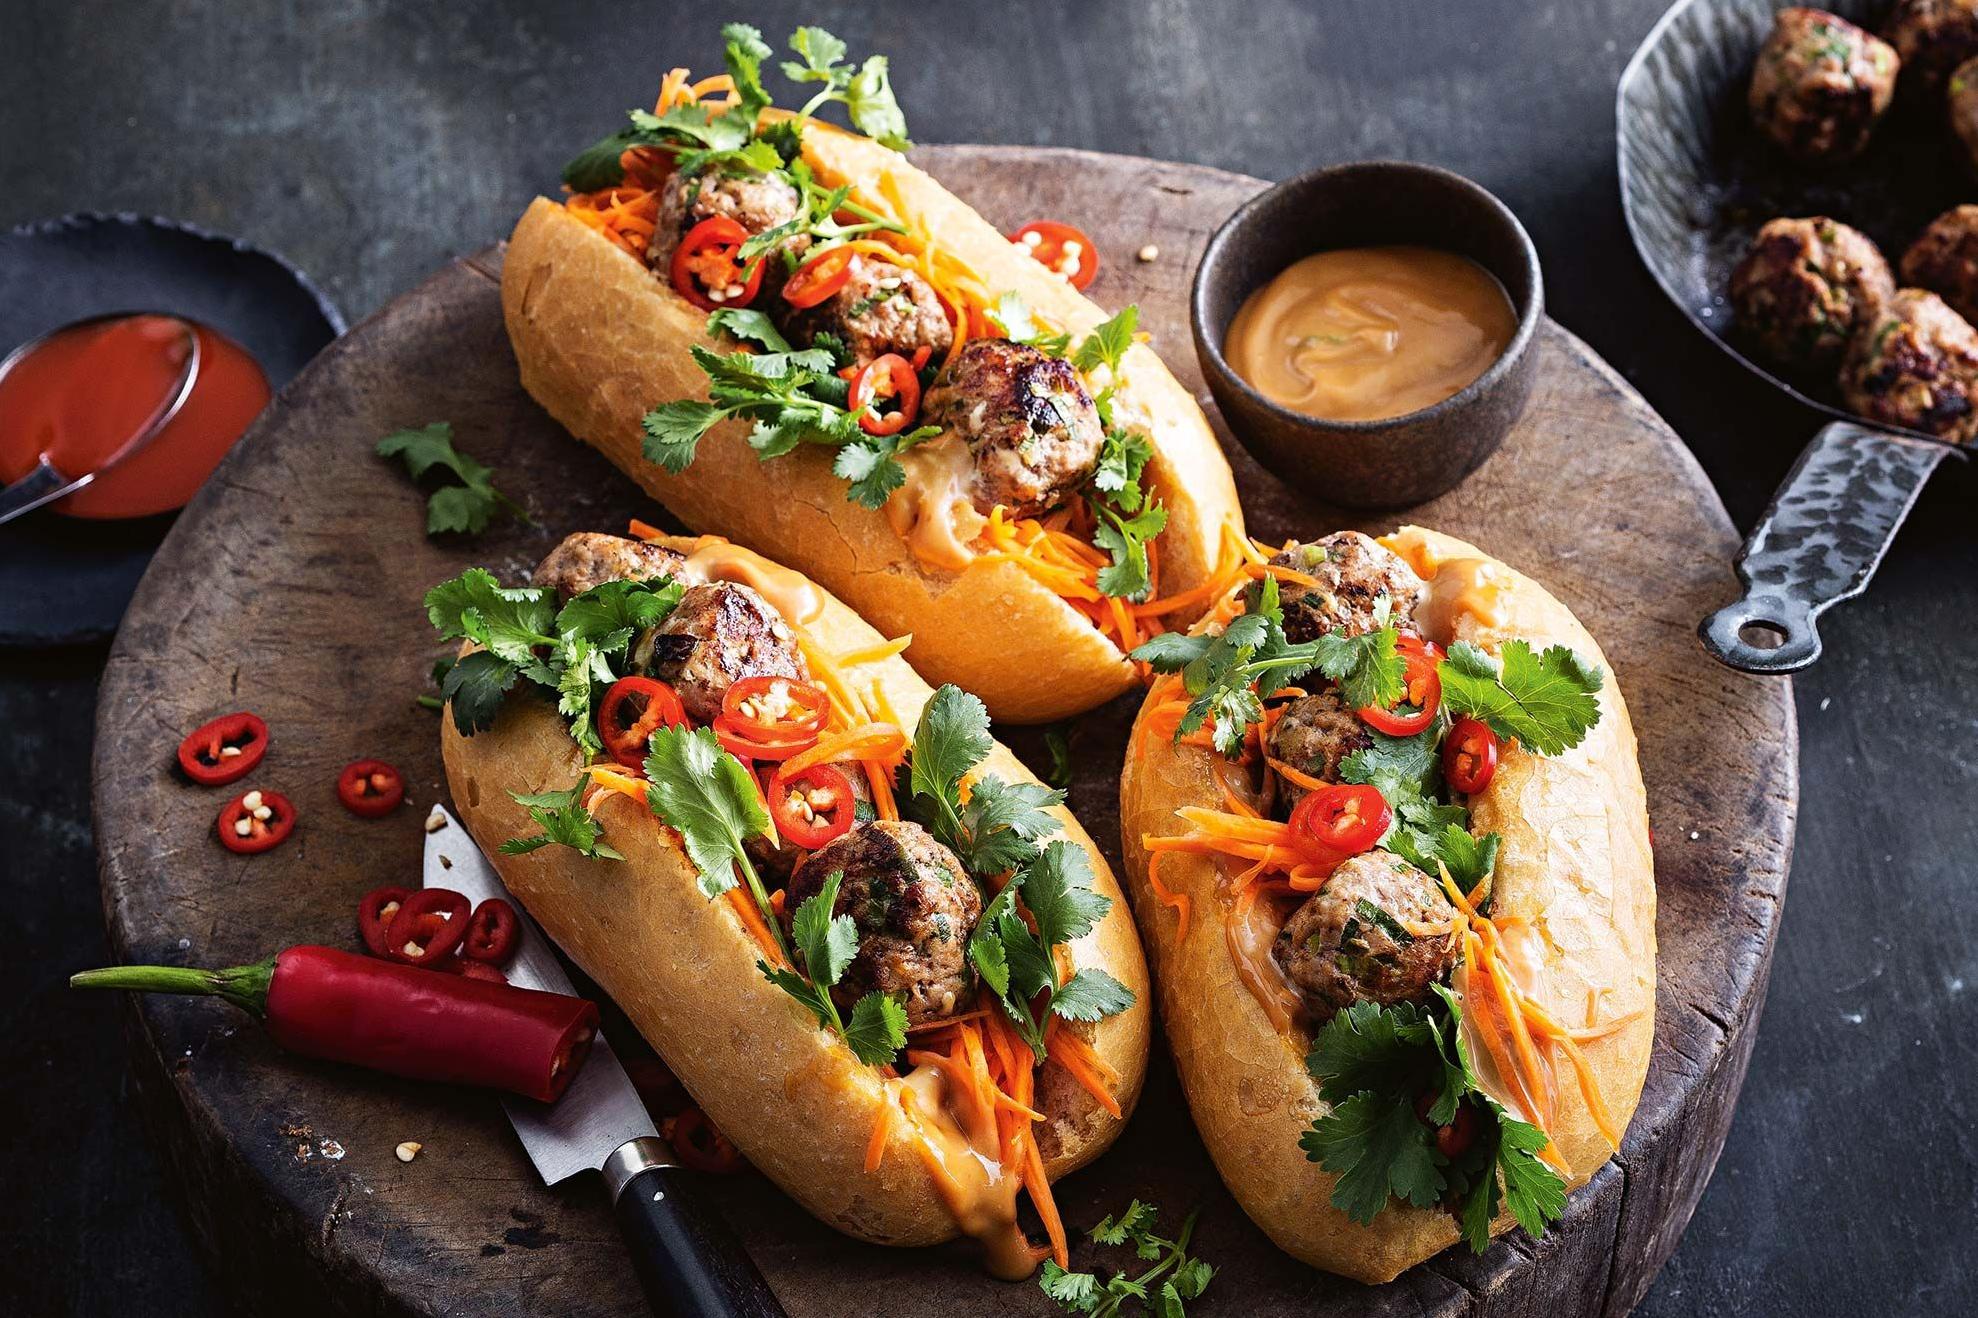  The colorful veggies and savory pork meatballs make for a stunning sandwich.